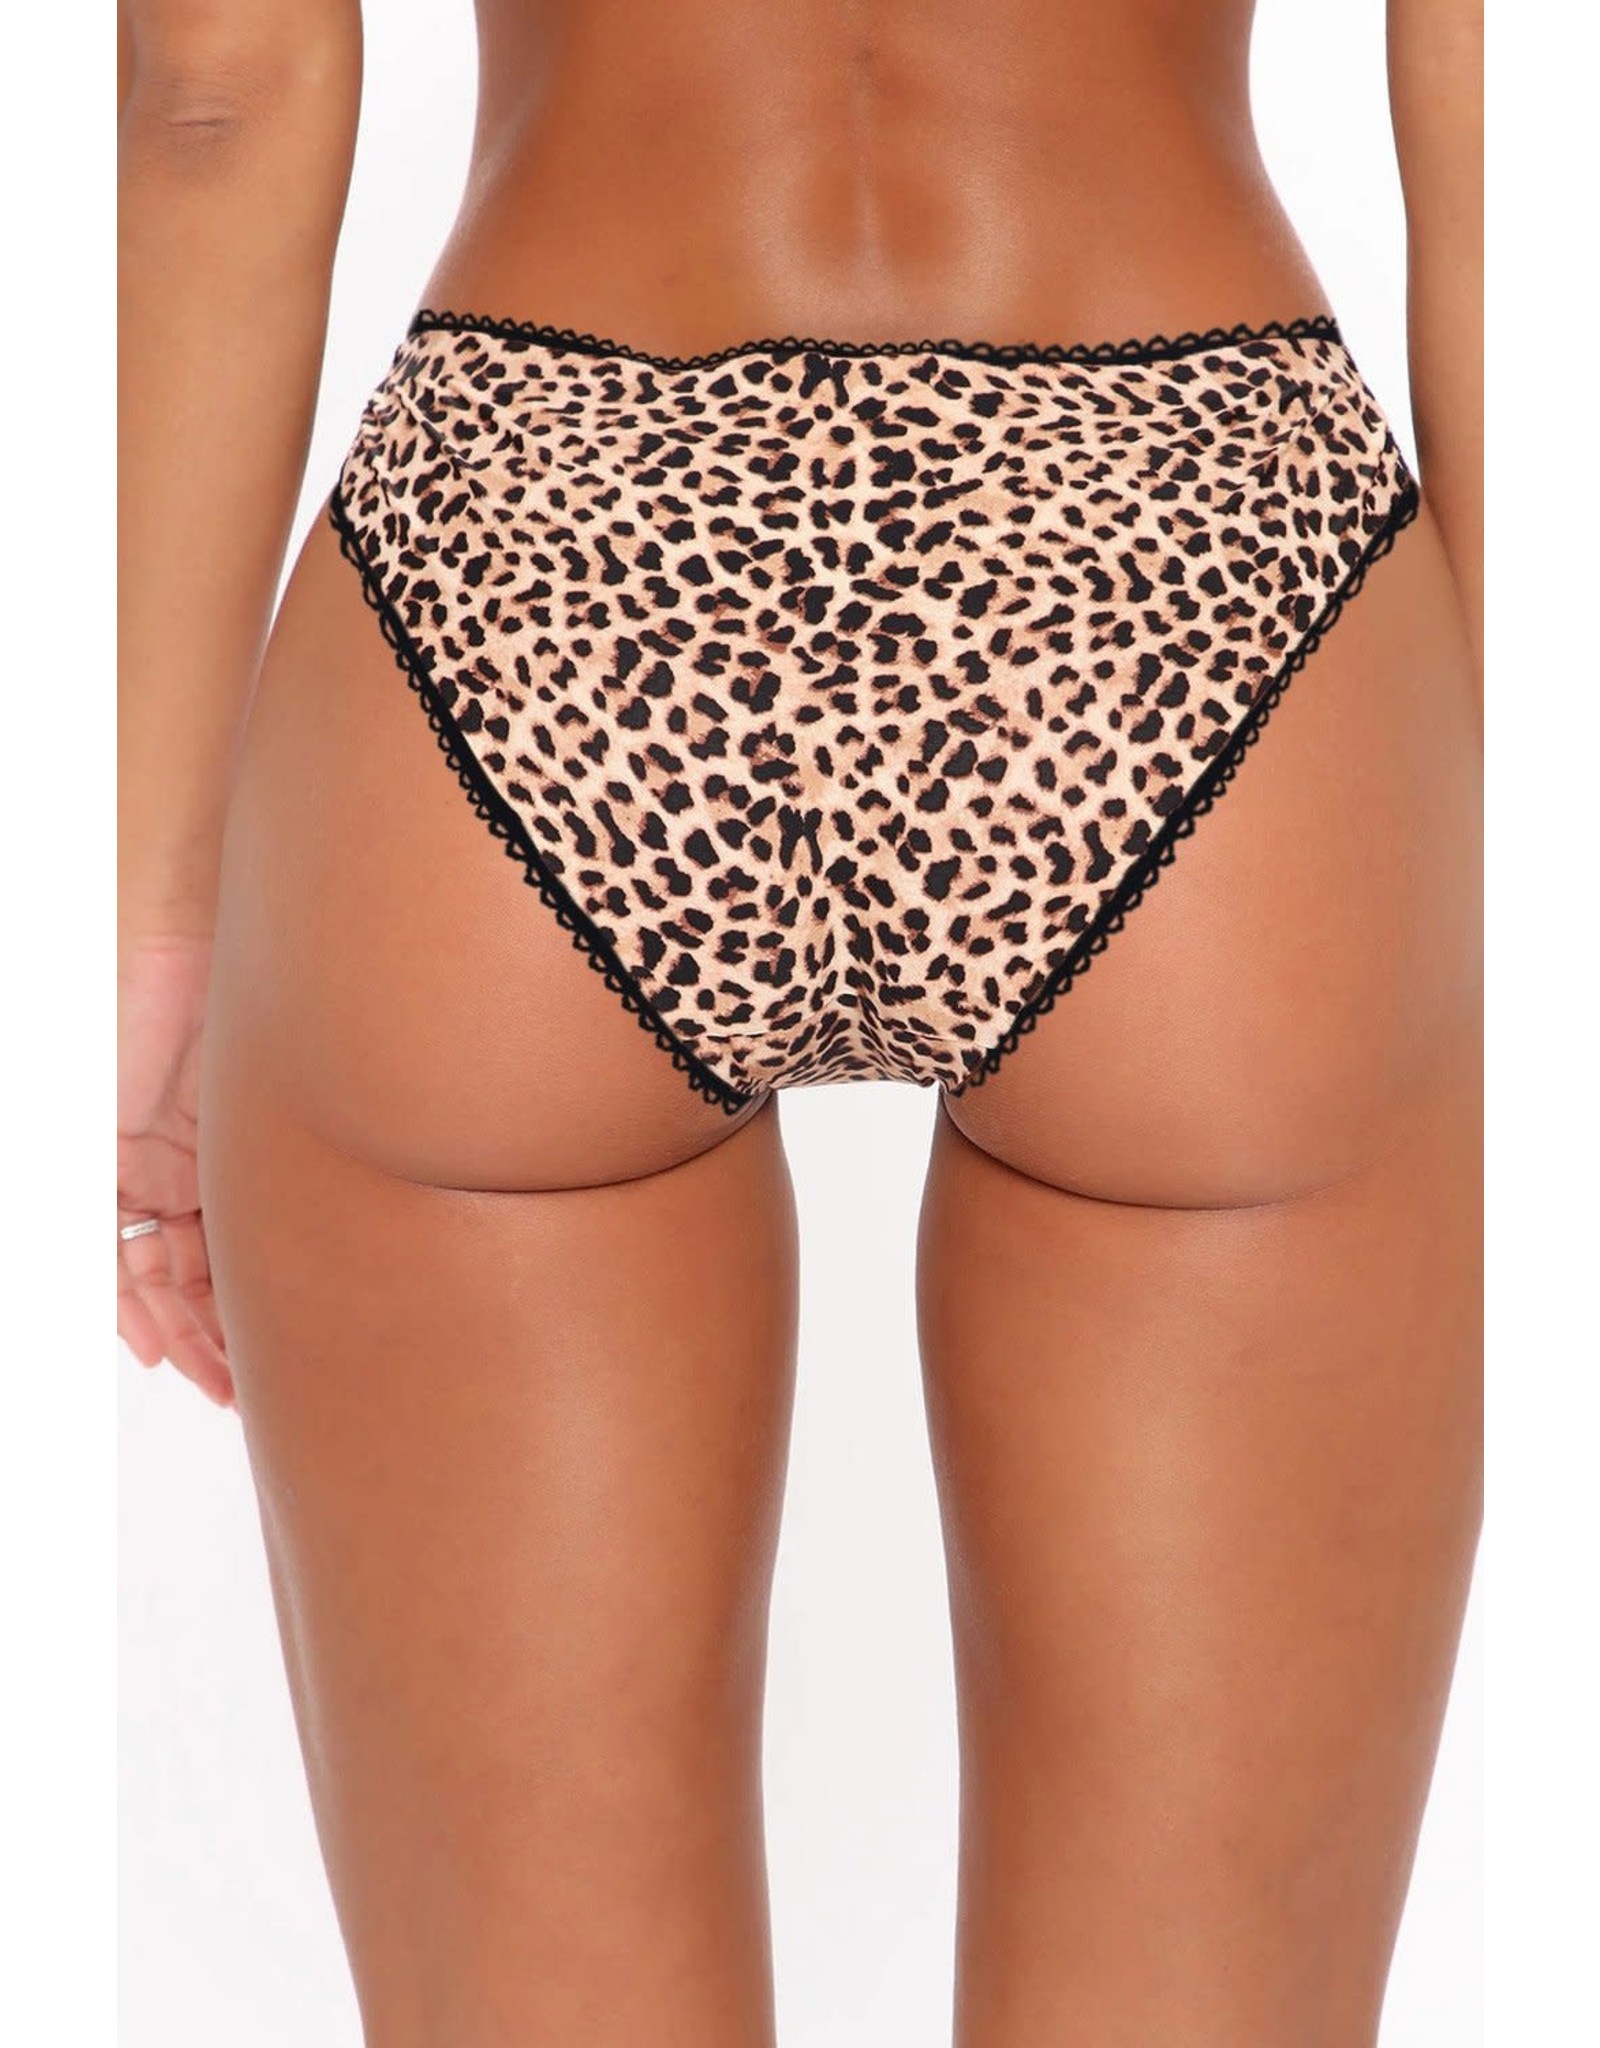 ANIMAL LEOPARD LACE PATCHWORK HOLLOW OUT WILD PANTY - (US 12-14)L